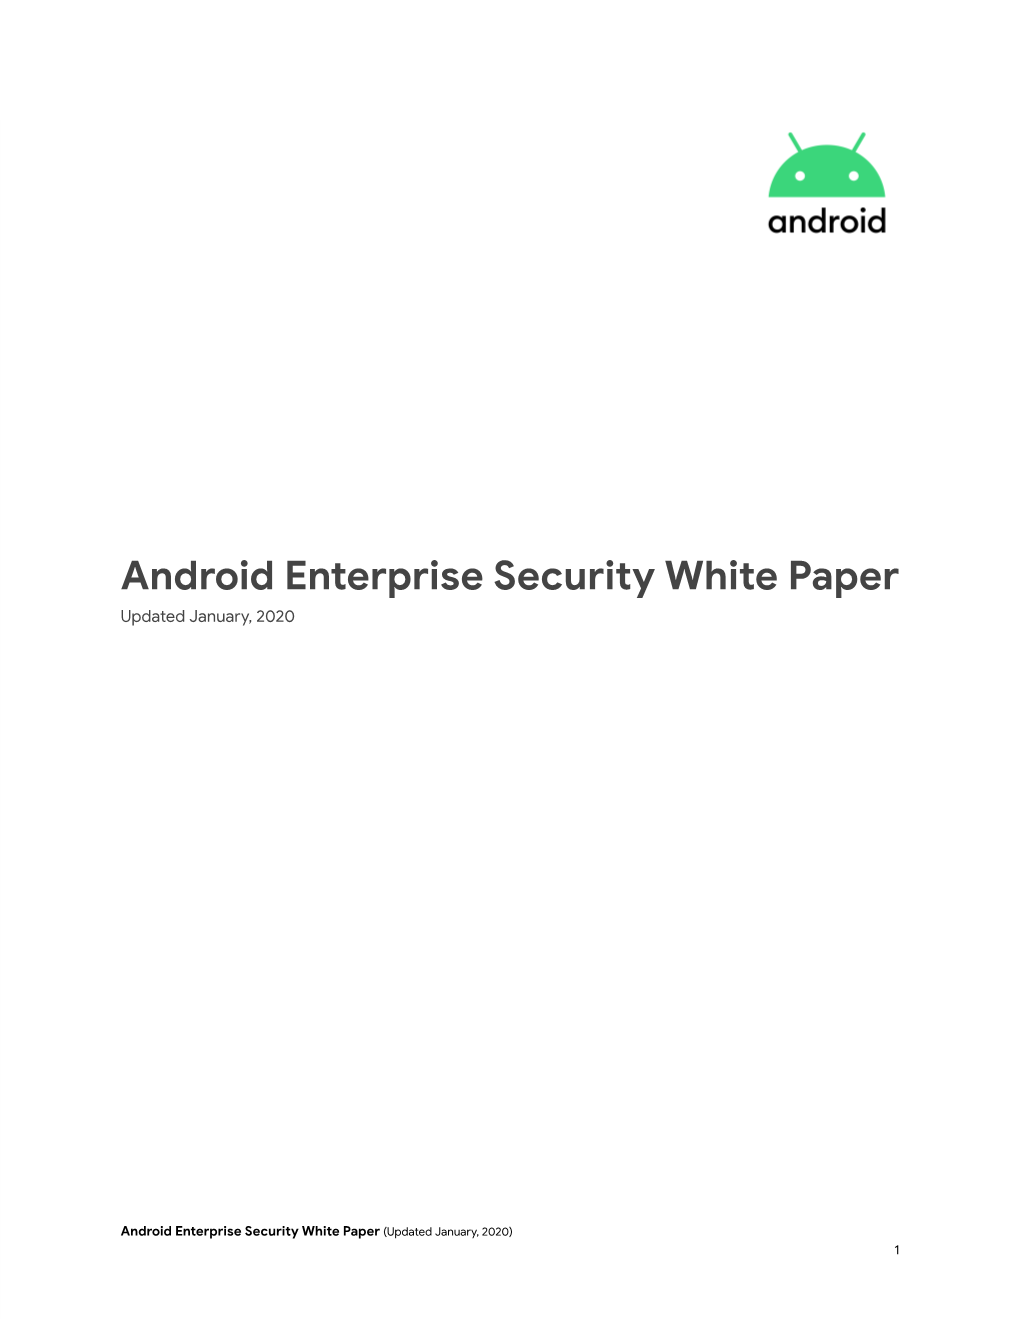 Android Enterprise Security White Paper Updated J Anuary, 2 020